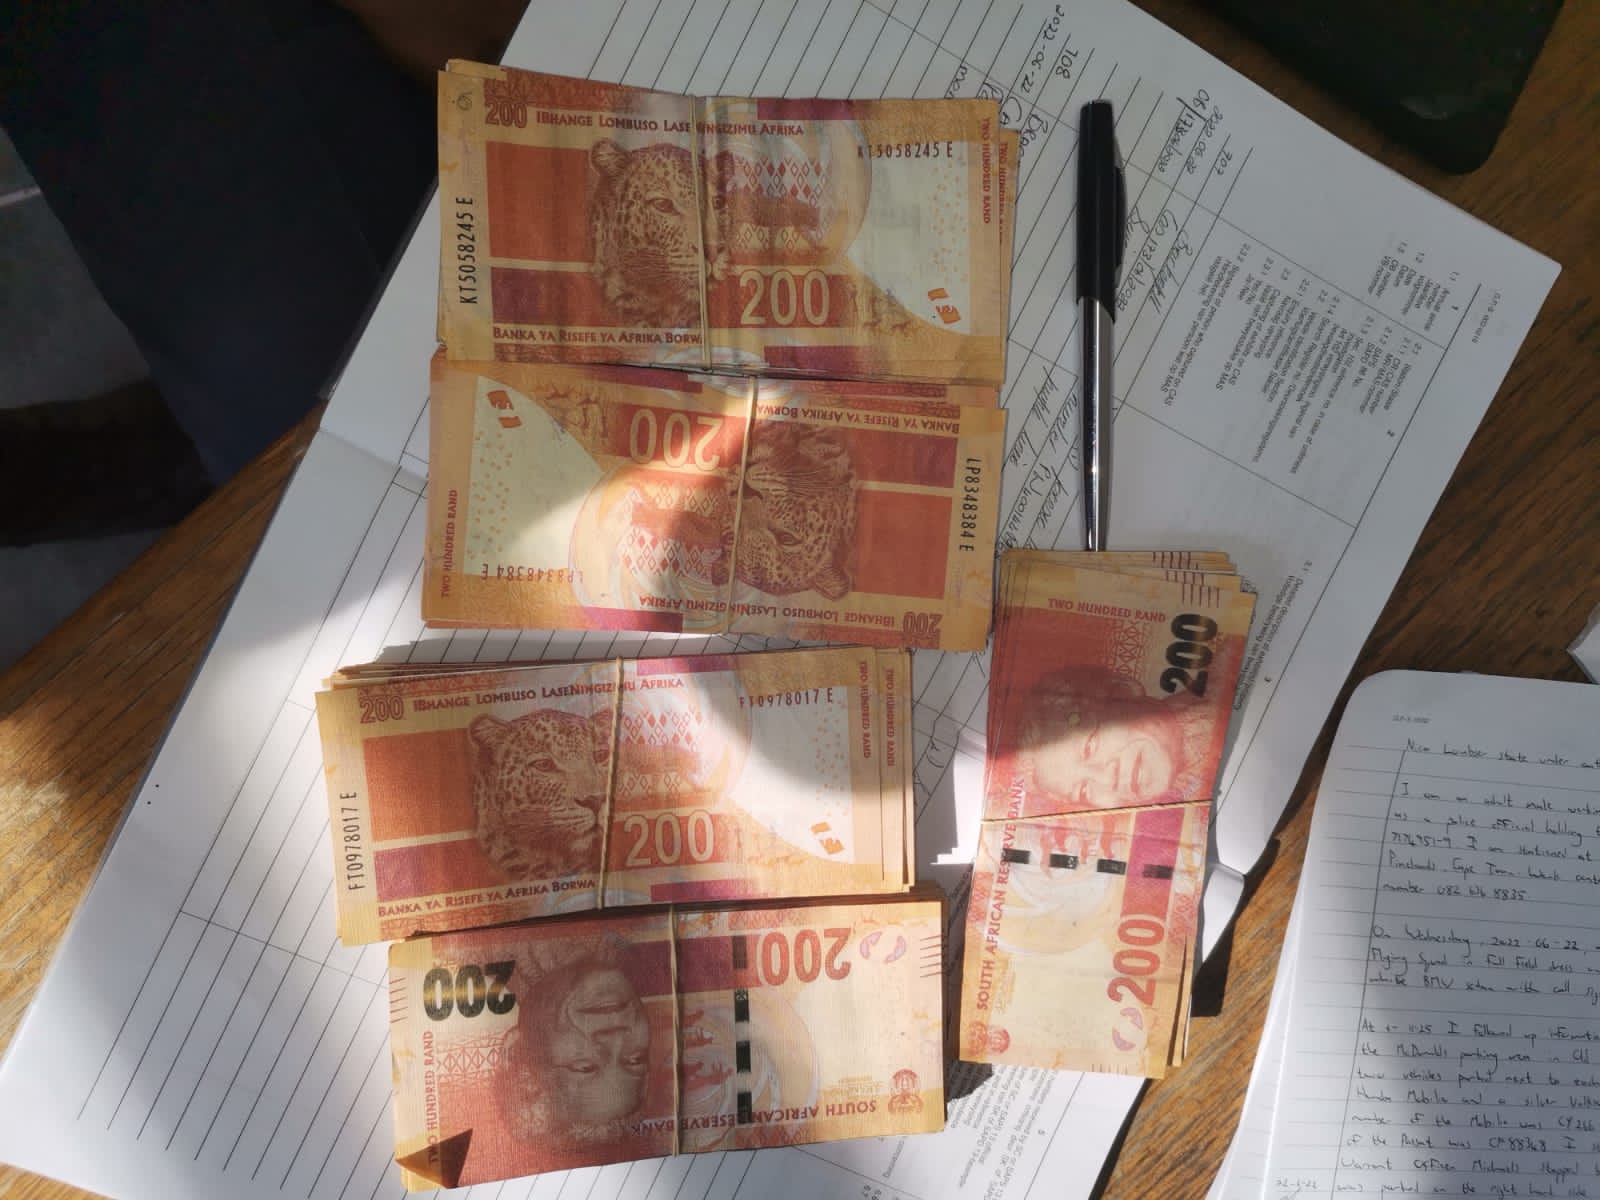 Suspects face court for possession of counterfeit money and bank cards